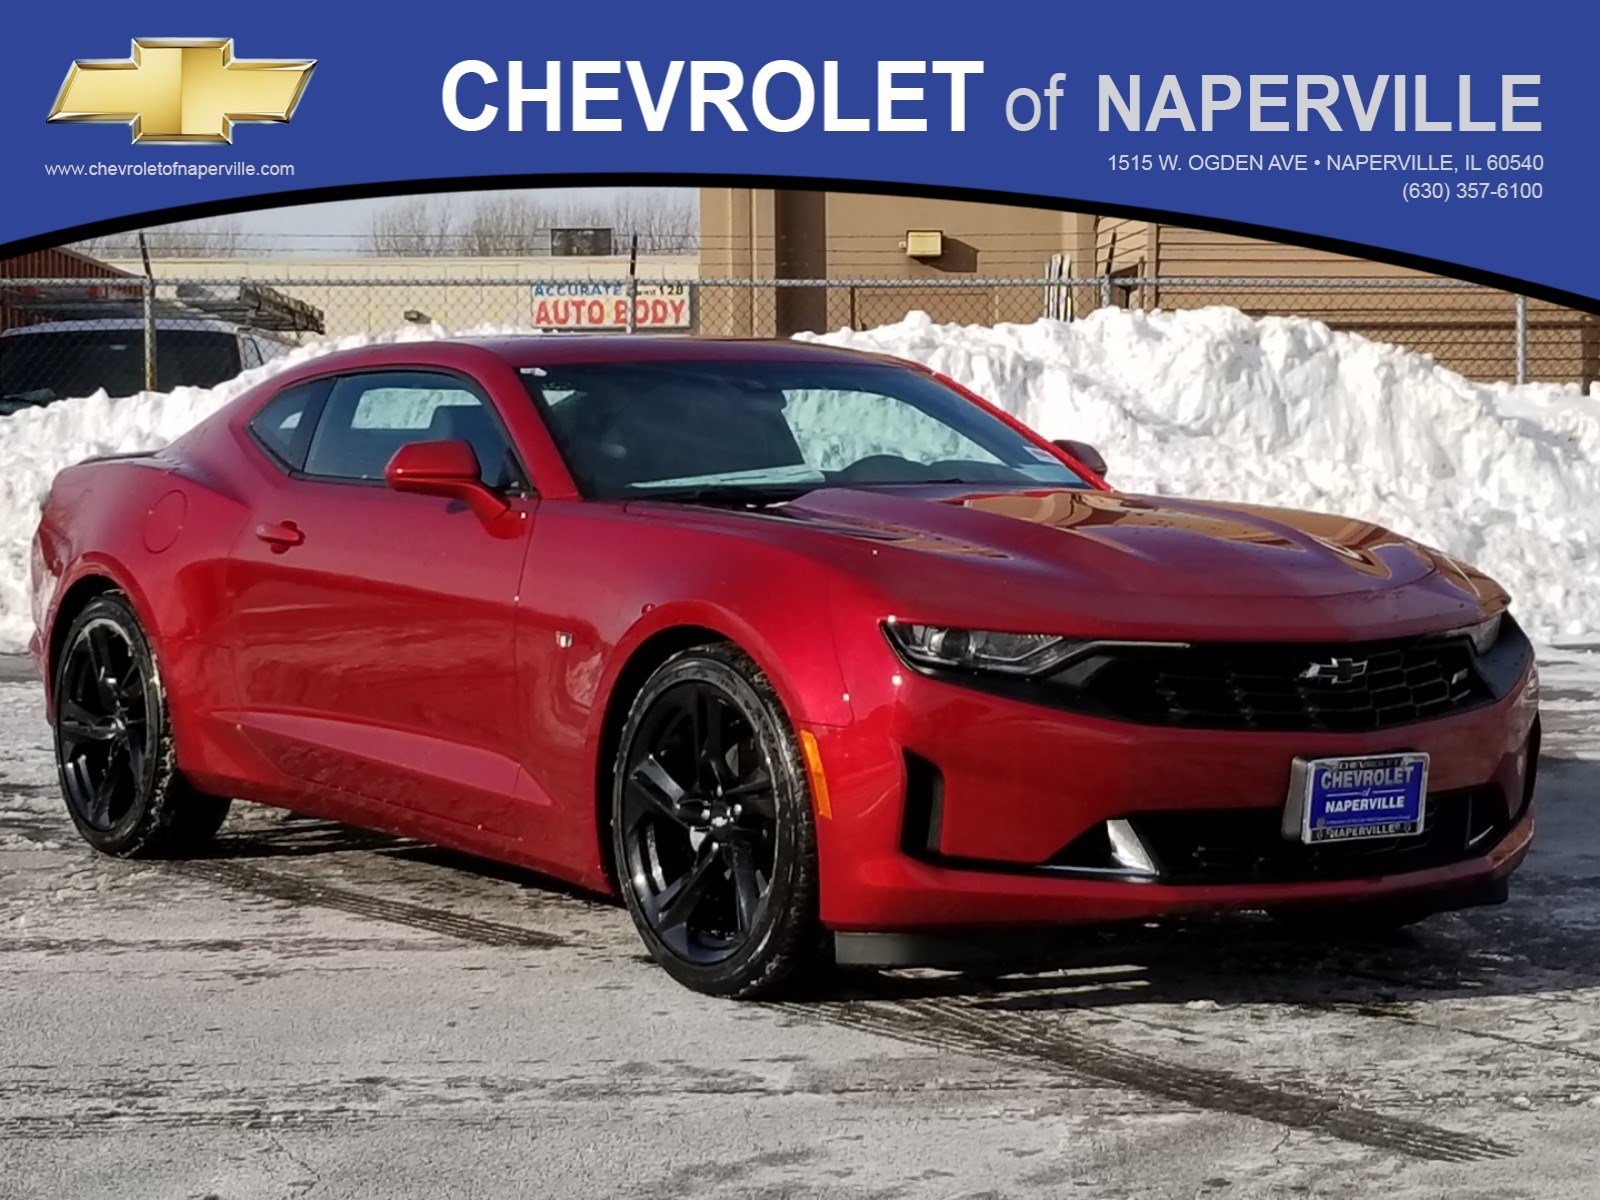 2019 Chevrolet Camaro Red And Black